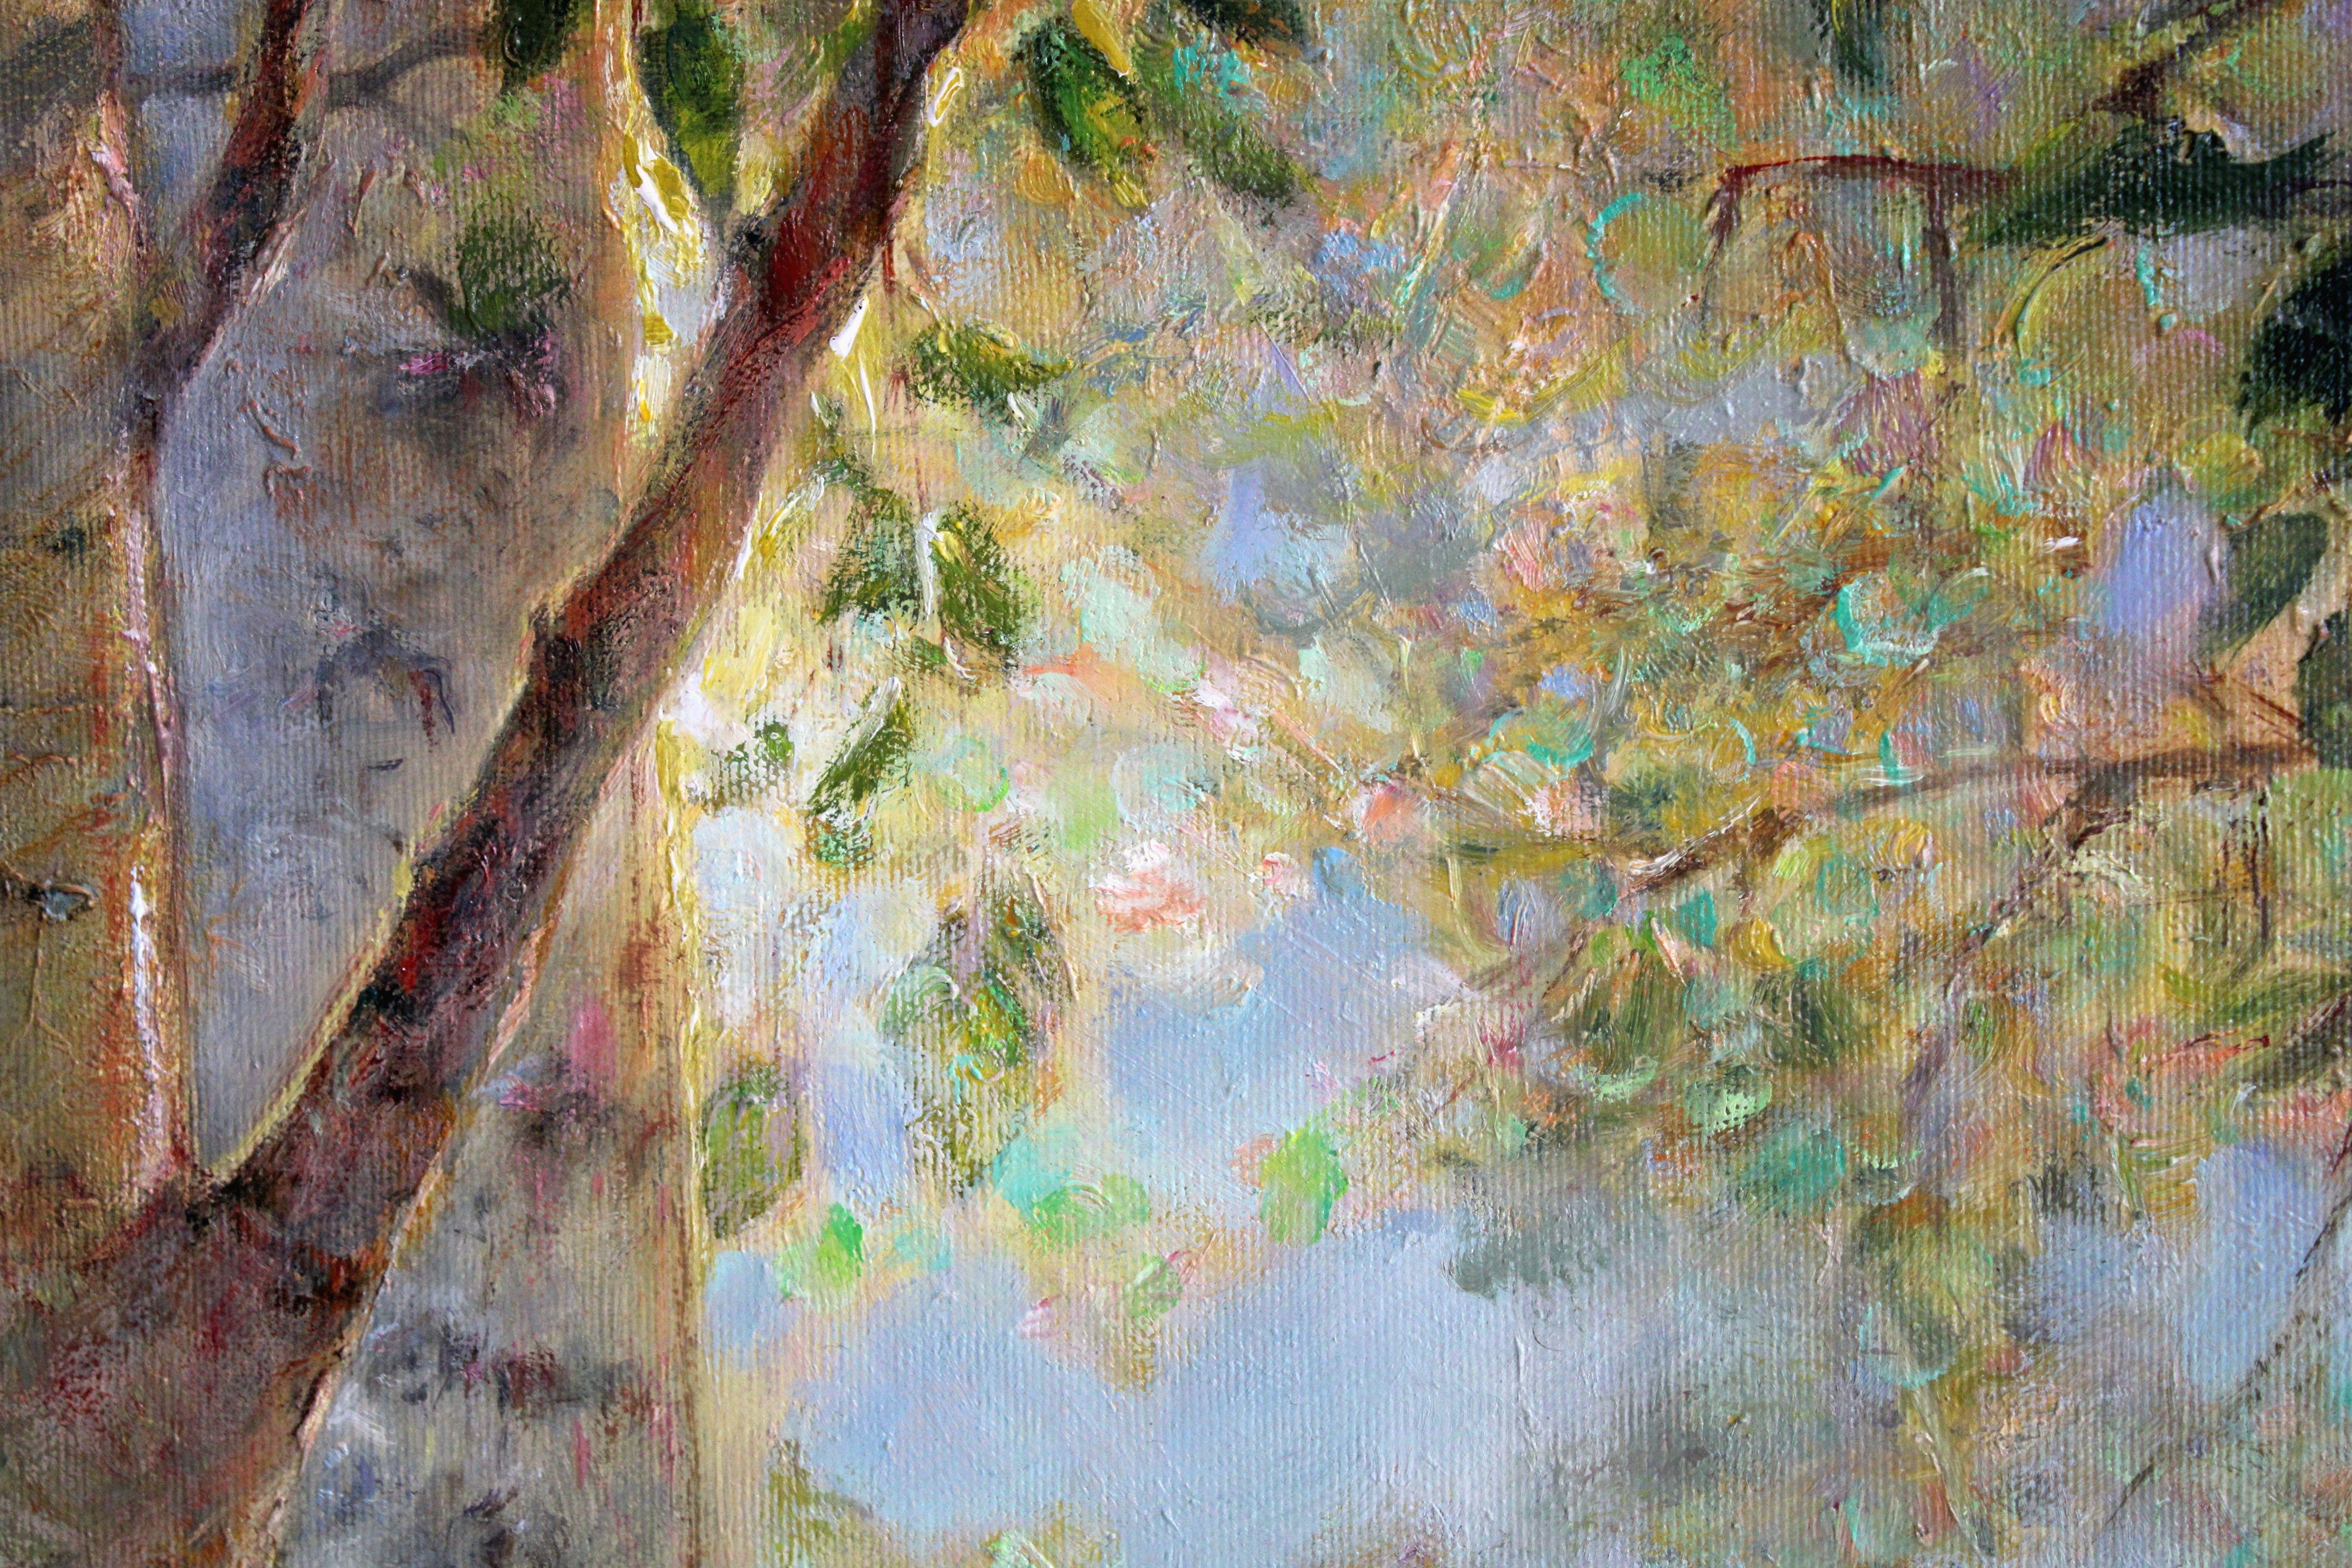 Landscape with birch trees. 2010, canvas, oil, 79x137 cm 3